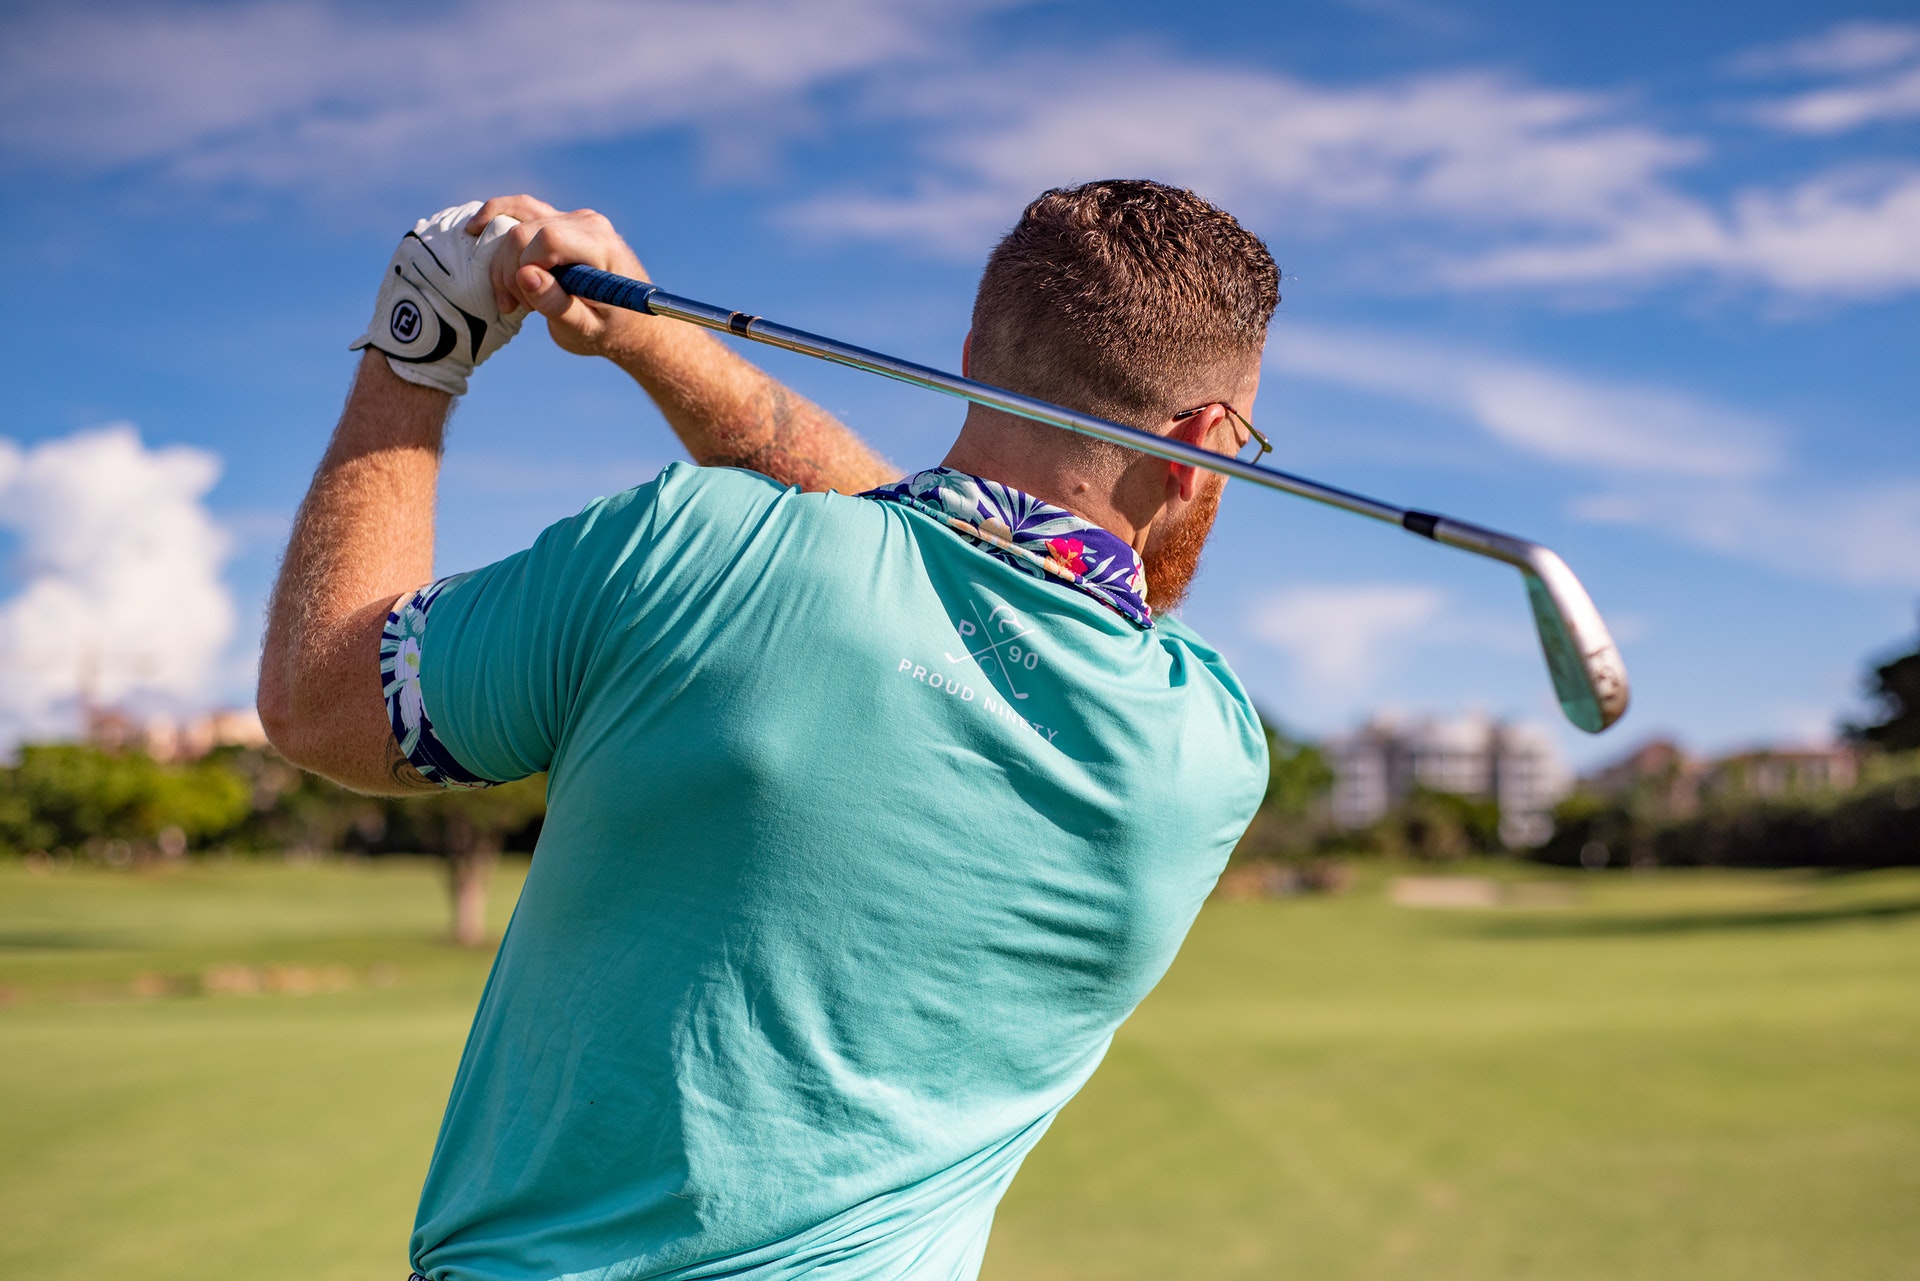 Easy Tricks To Master Your Golf Swing